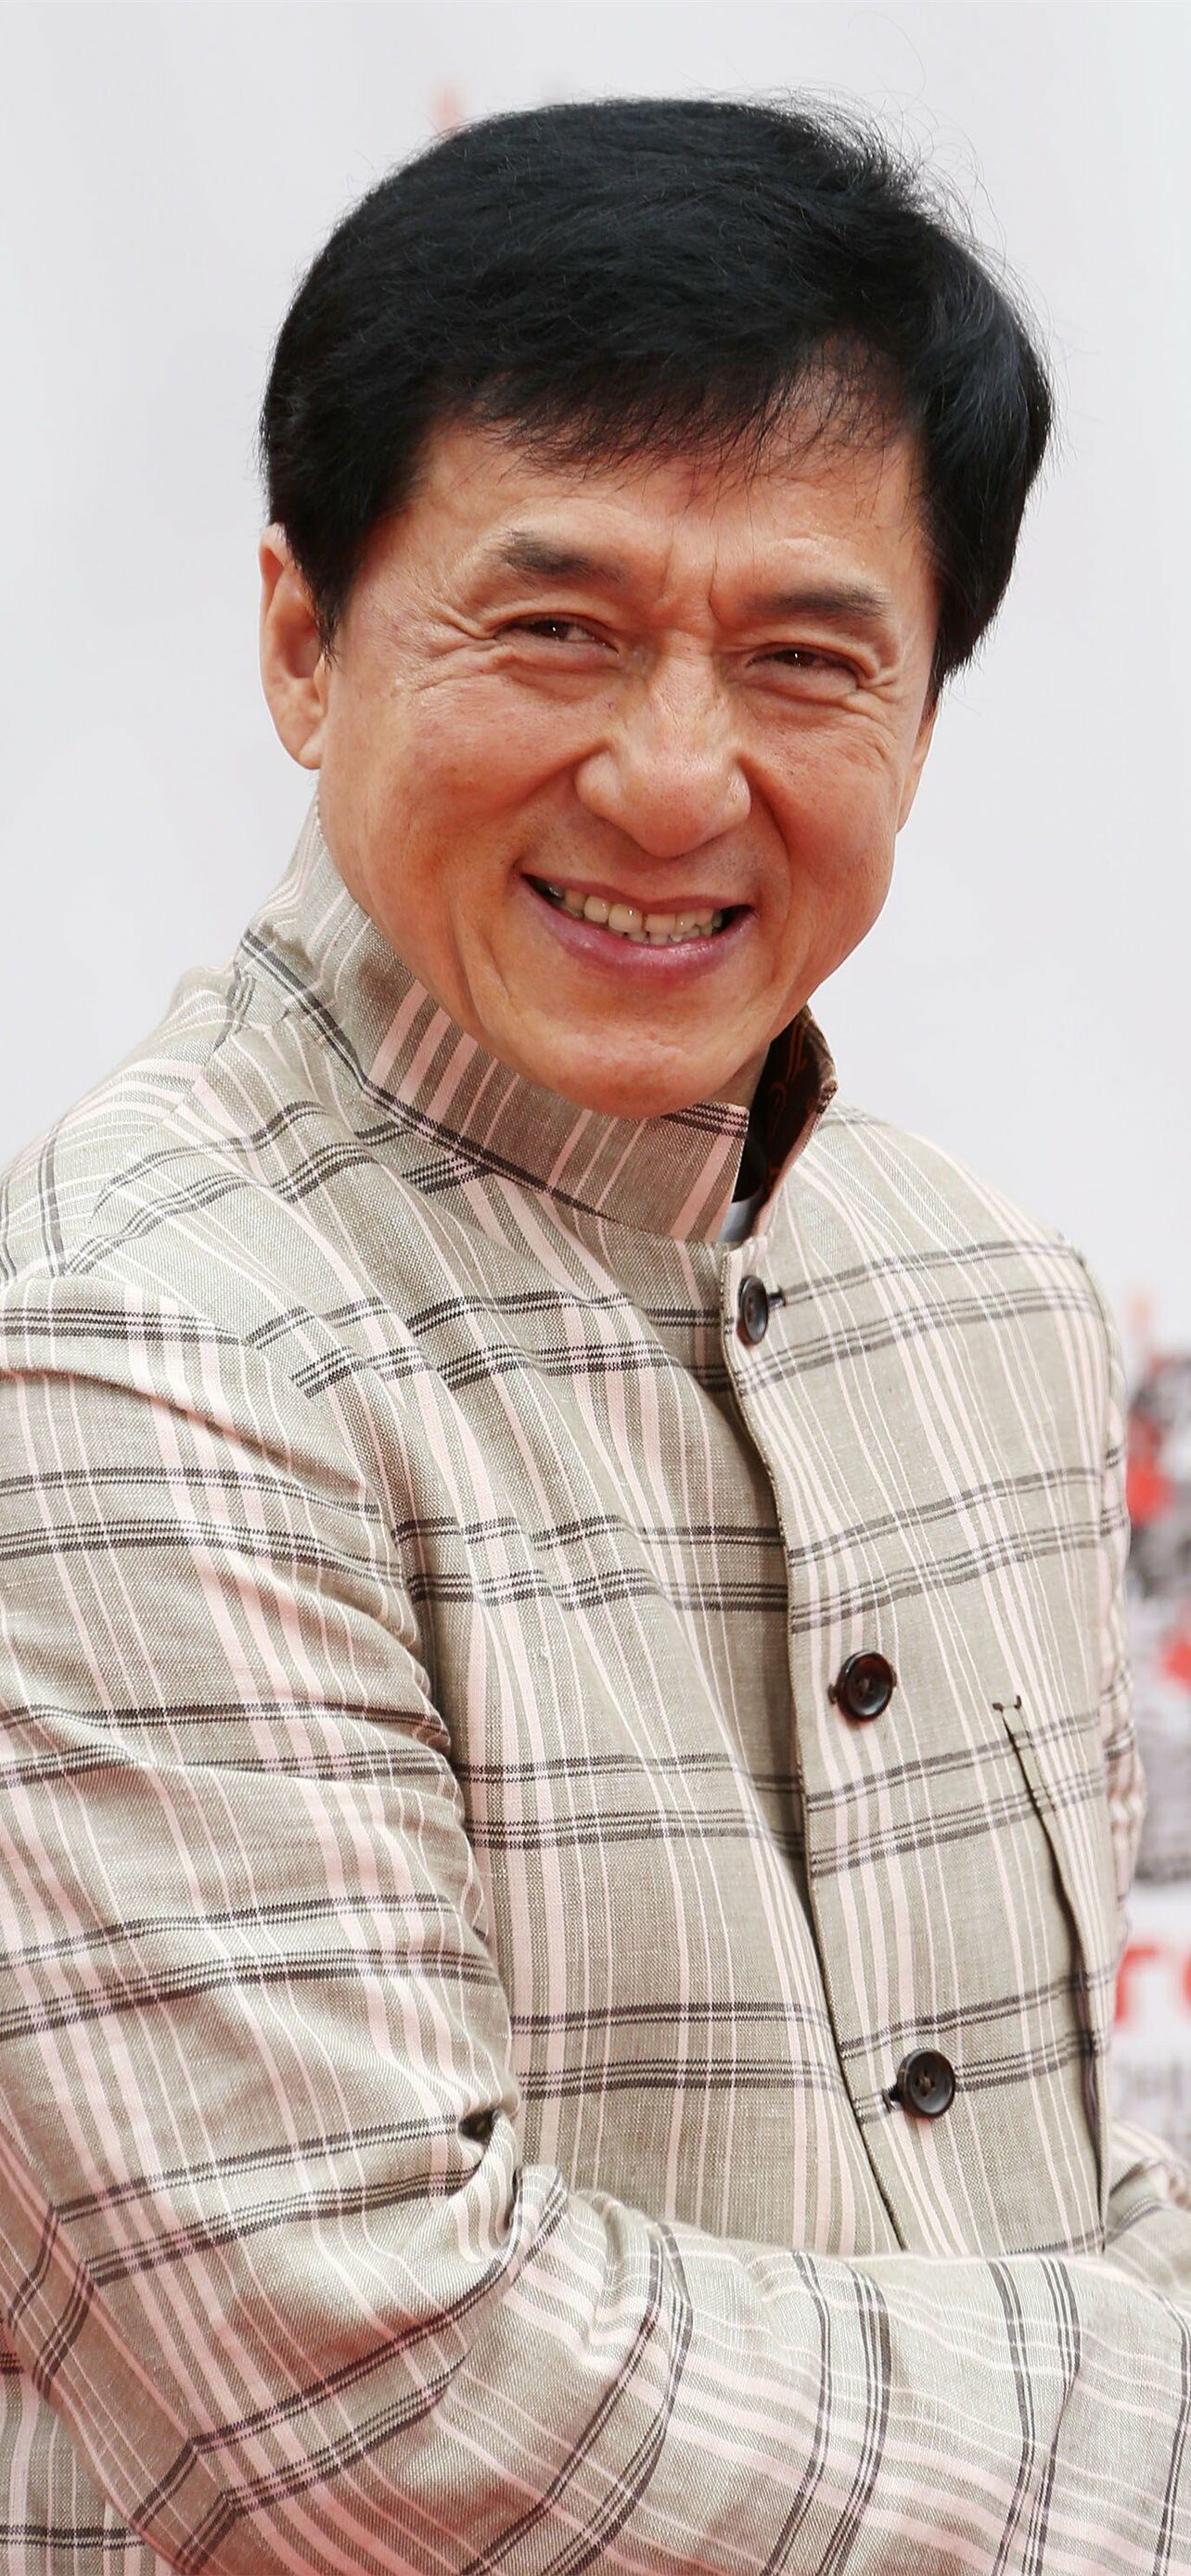 Jackie Chan 2018 wallpapers, Cave iPhone backgrounds, Free download, Cool style, 1290x2780 HD Handy